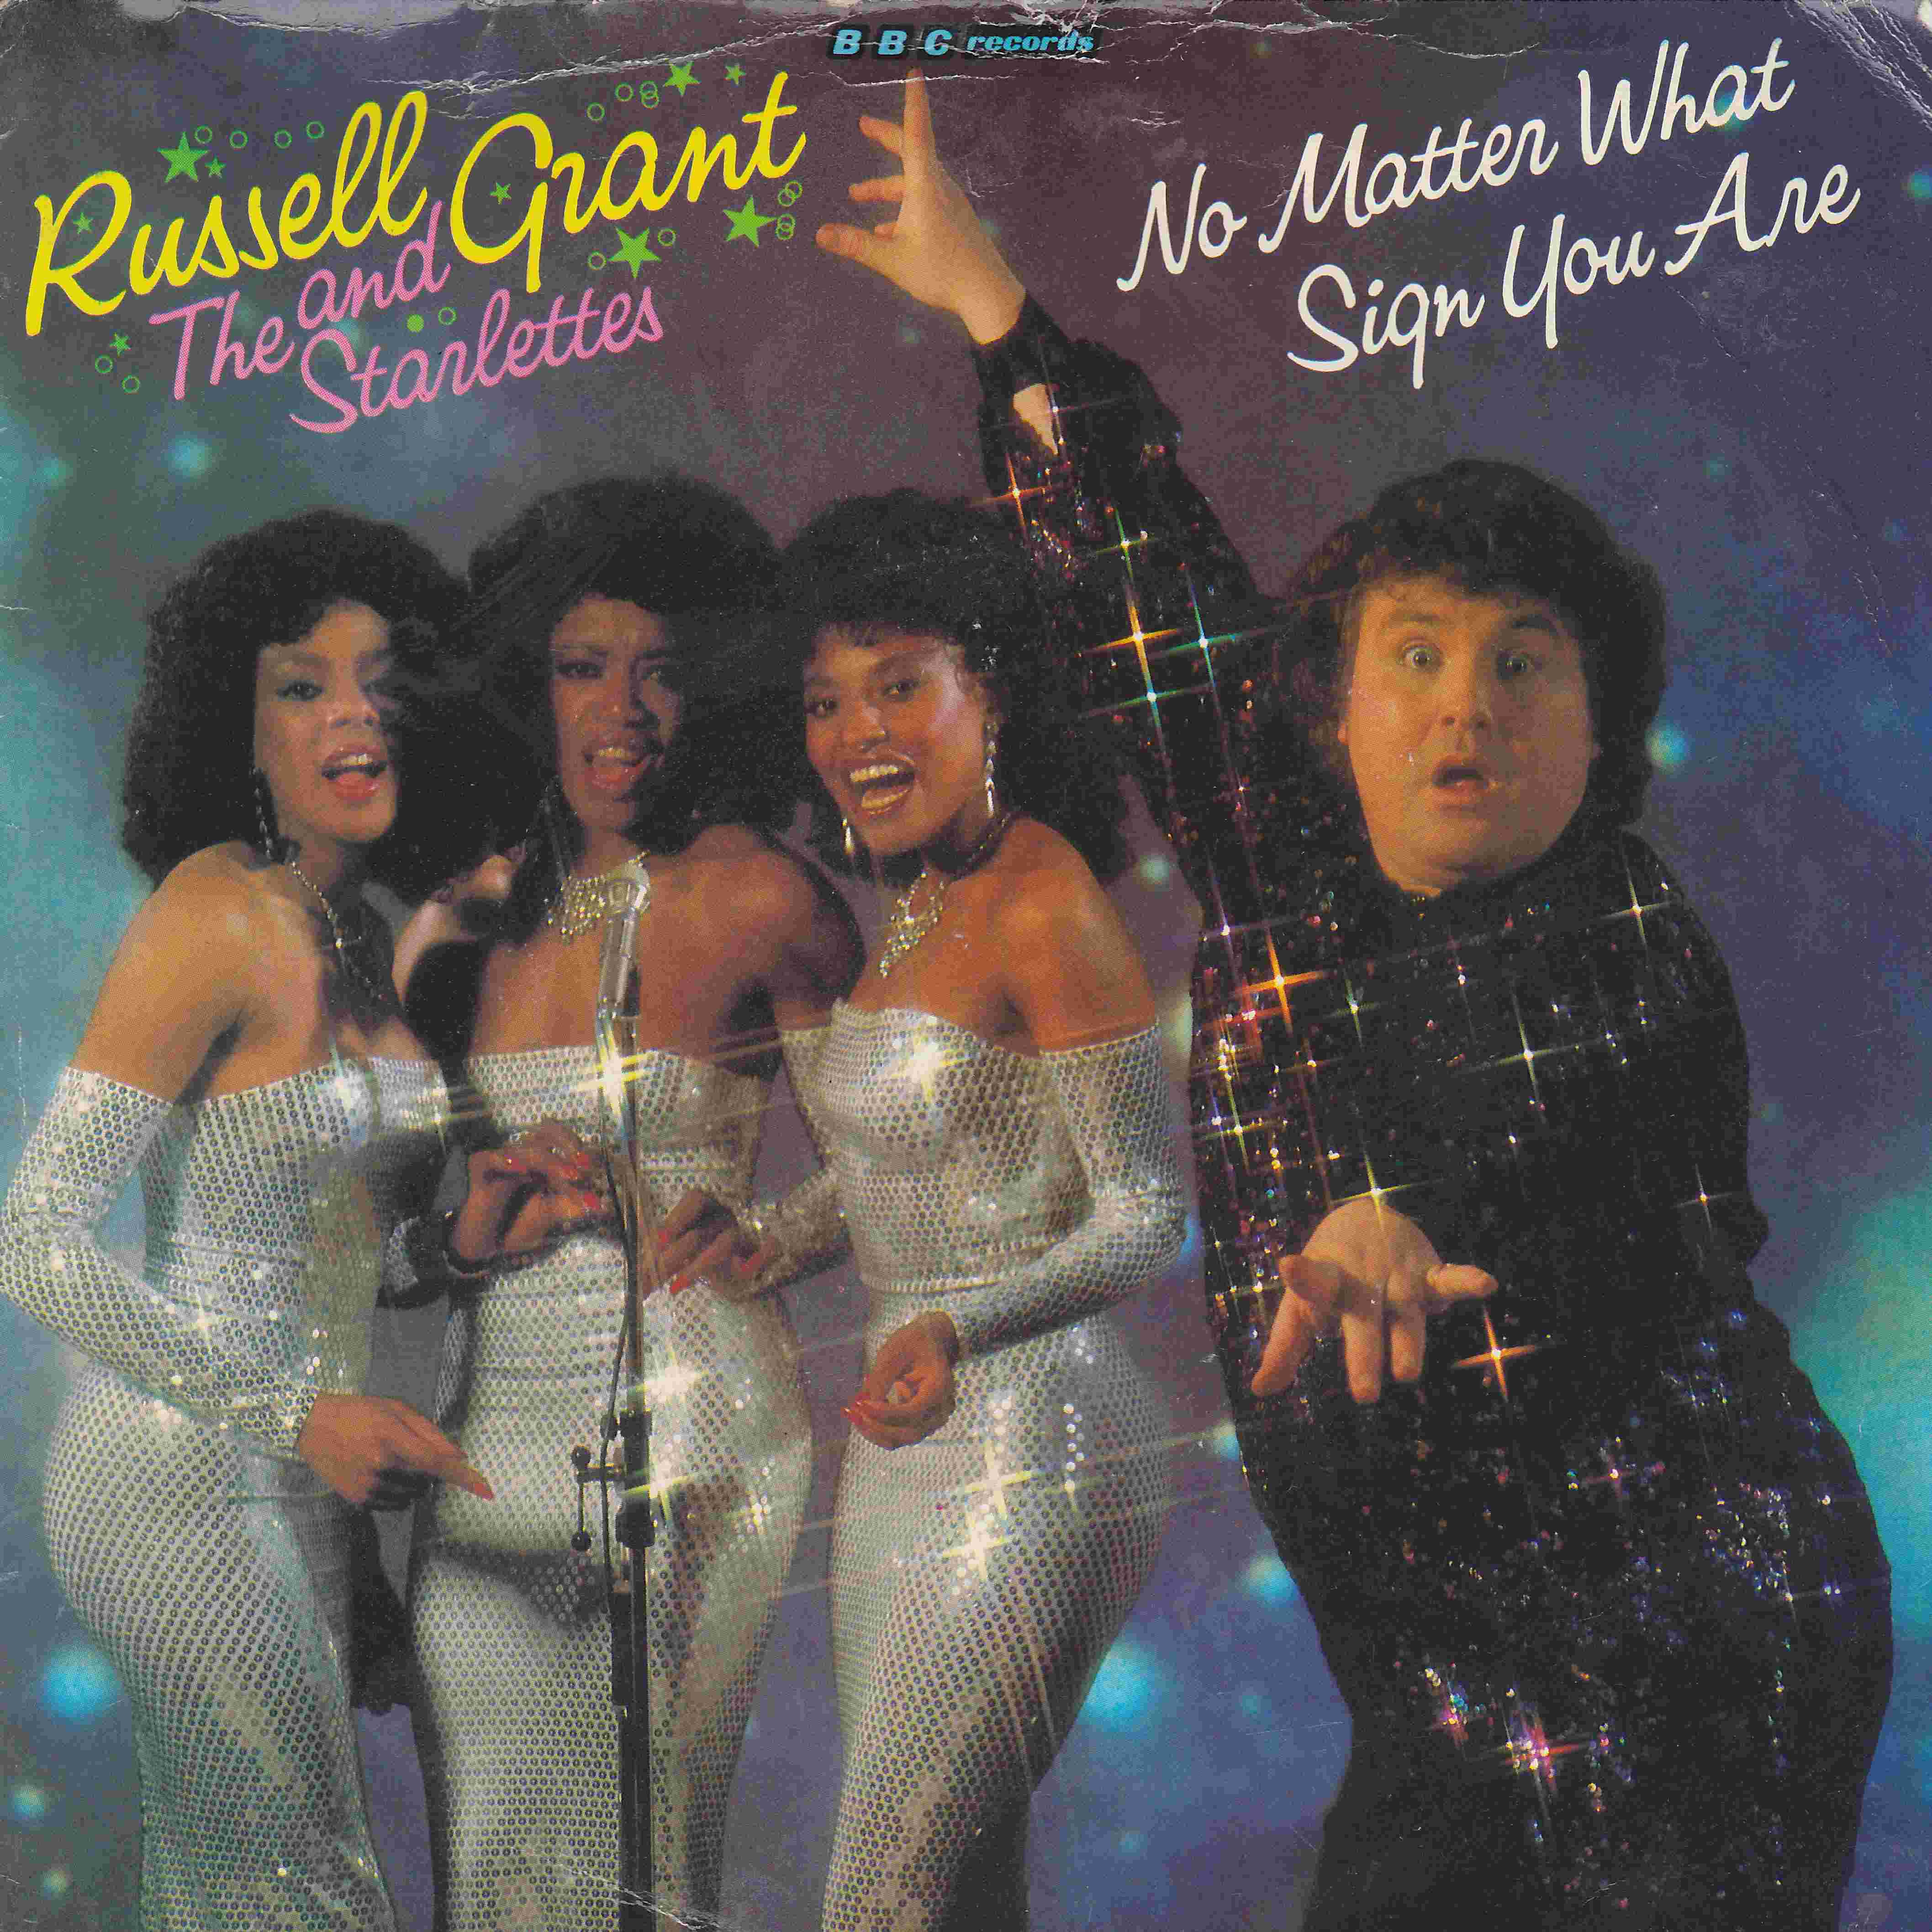 Picture of RESL 131 No matter what sign you are by artist Russell Grant and the Starlettes from the BBC records and Tapes library